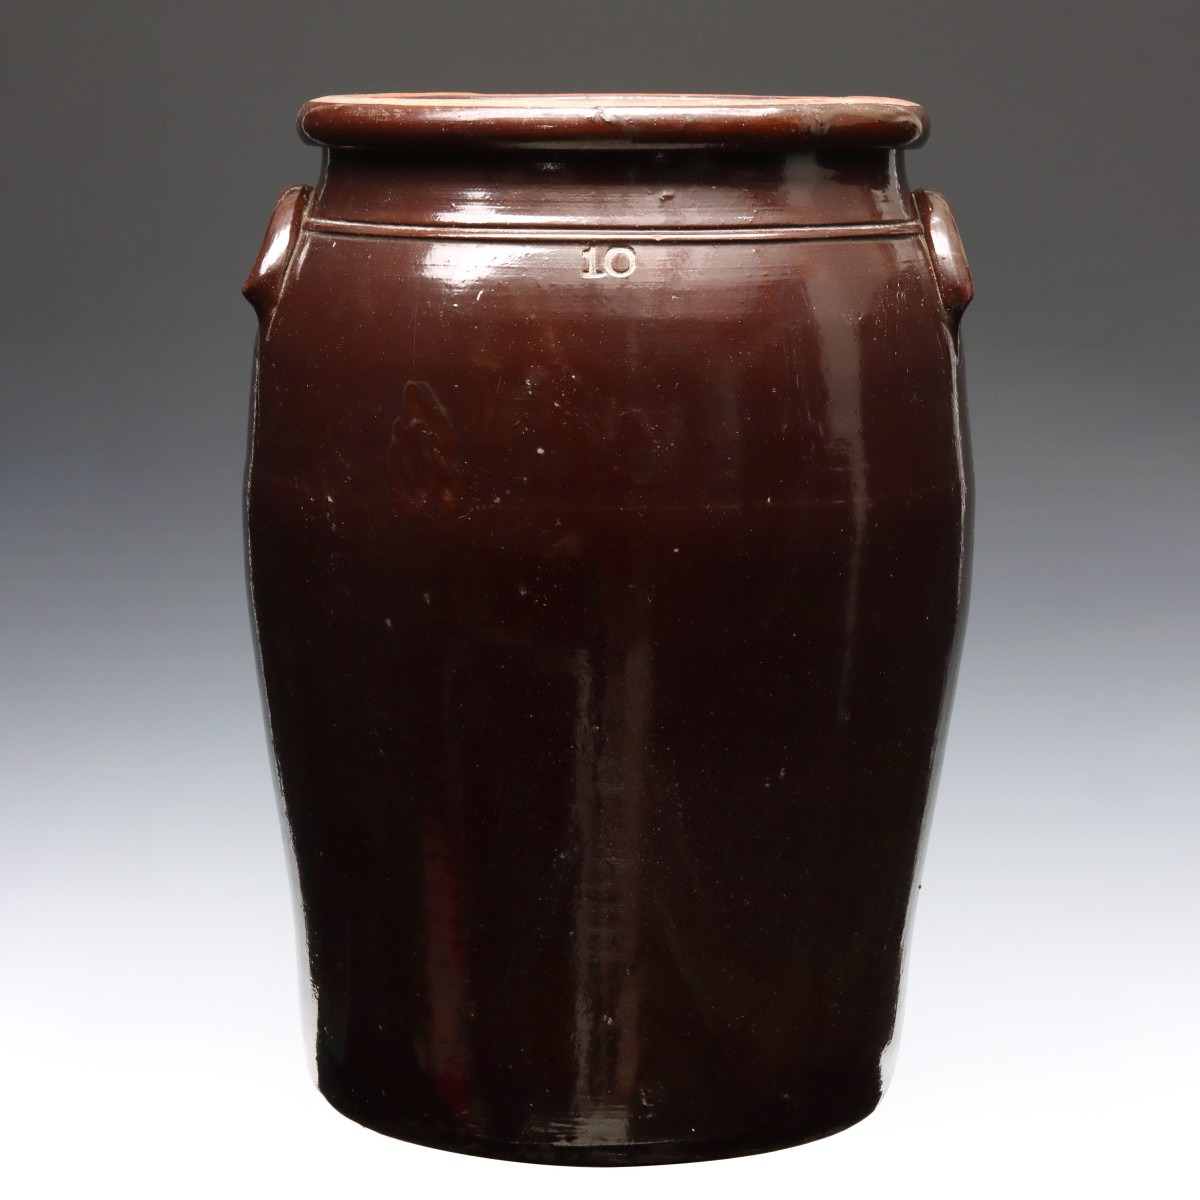 A TEN GALLON STORAGE CROCK ATTRIBUTED TO LINCOLN POTTERY